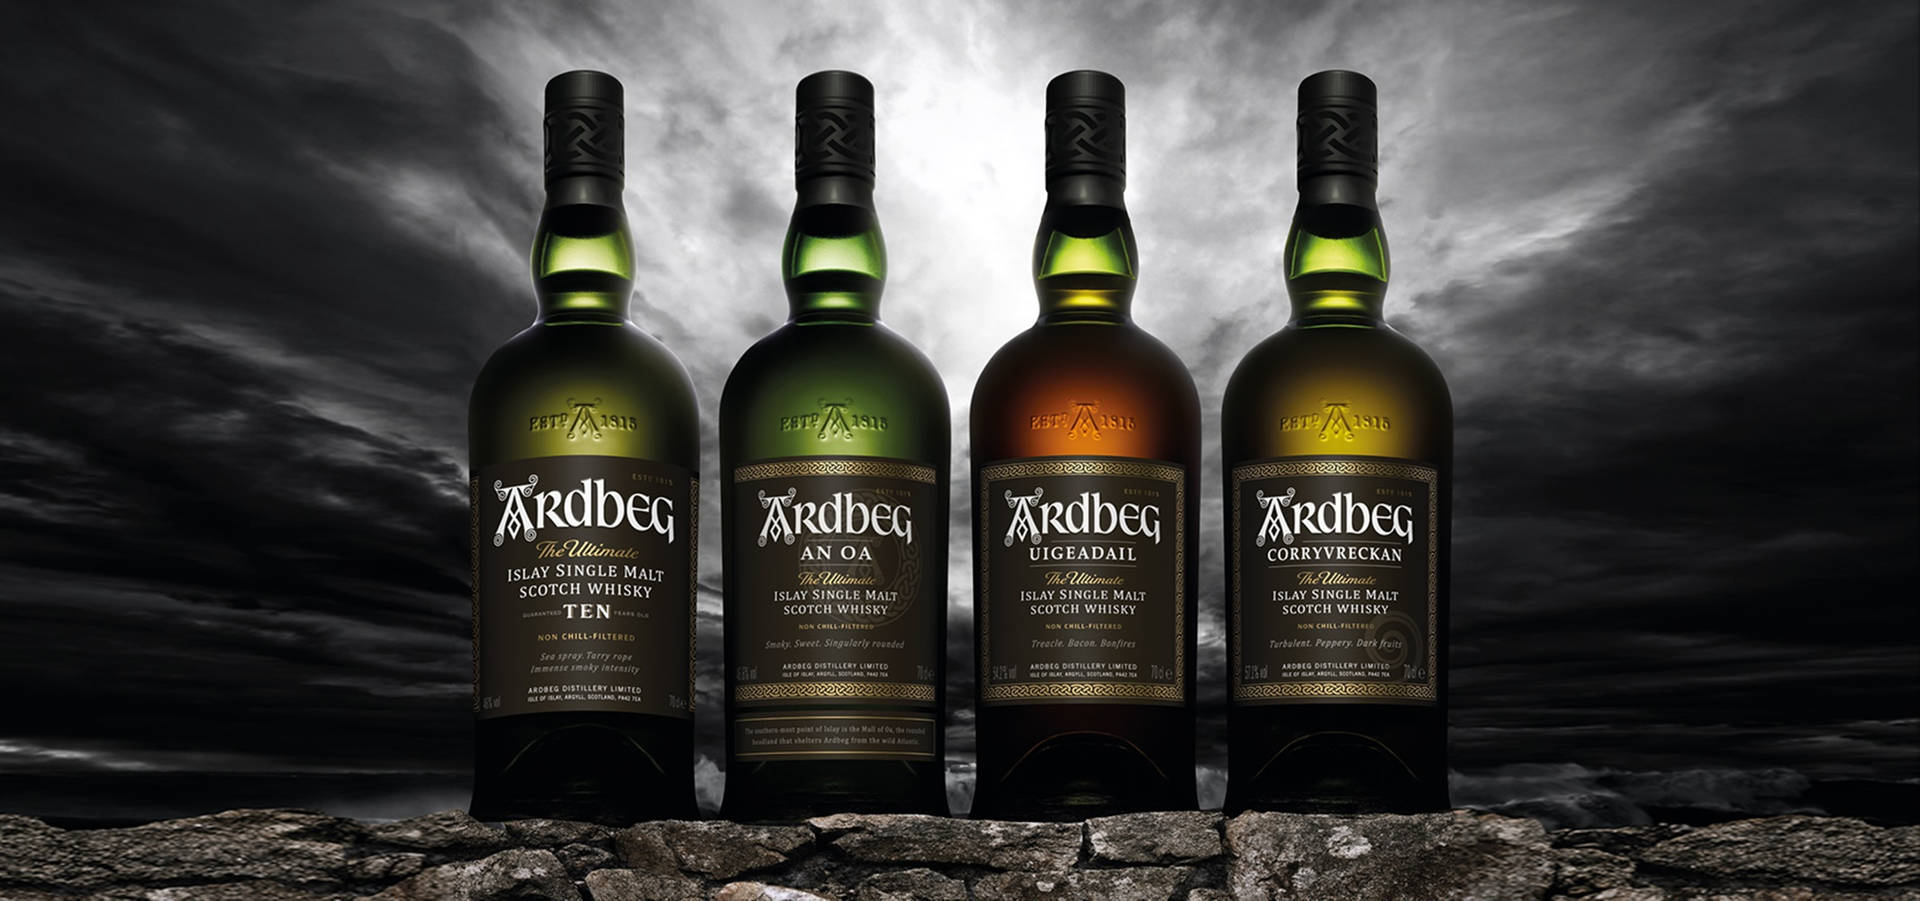 Ardbeg Whisky Collections At Stormy Weather Wallpaper